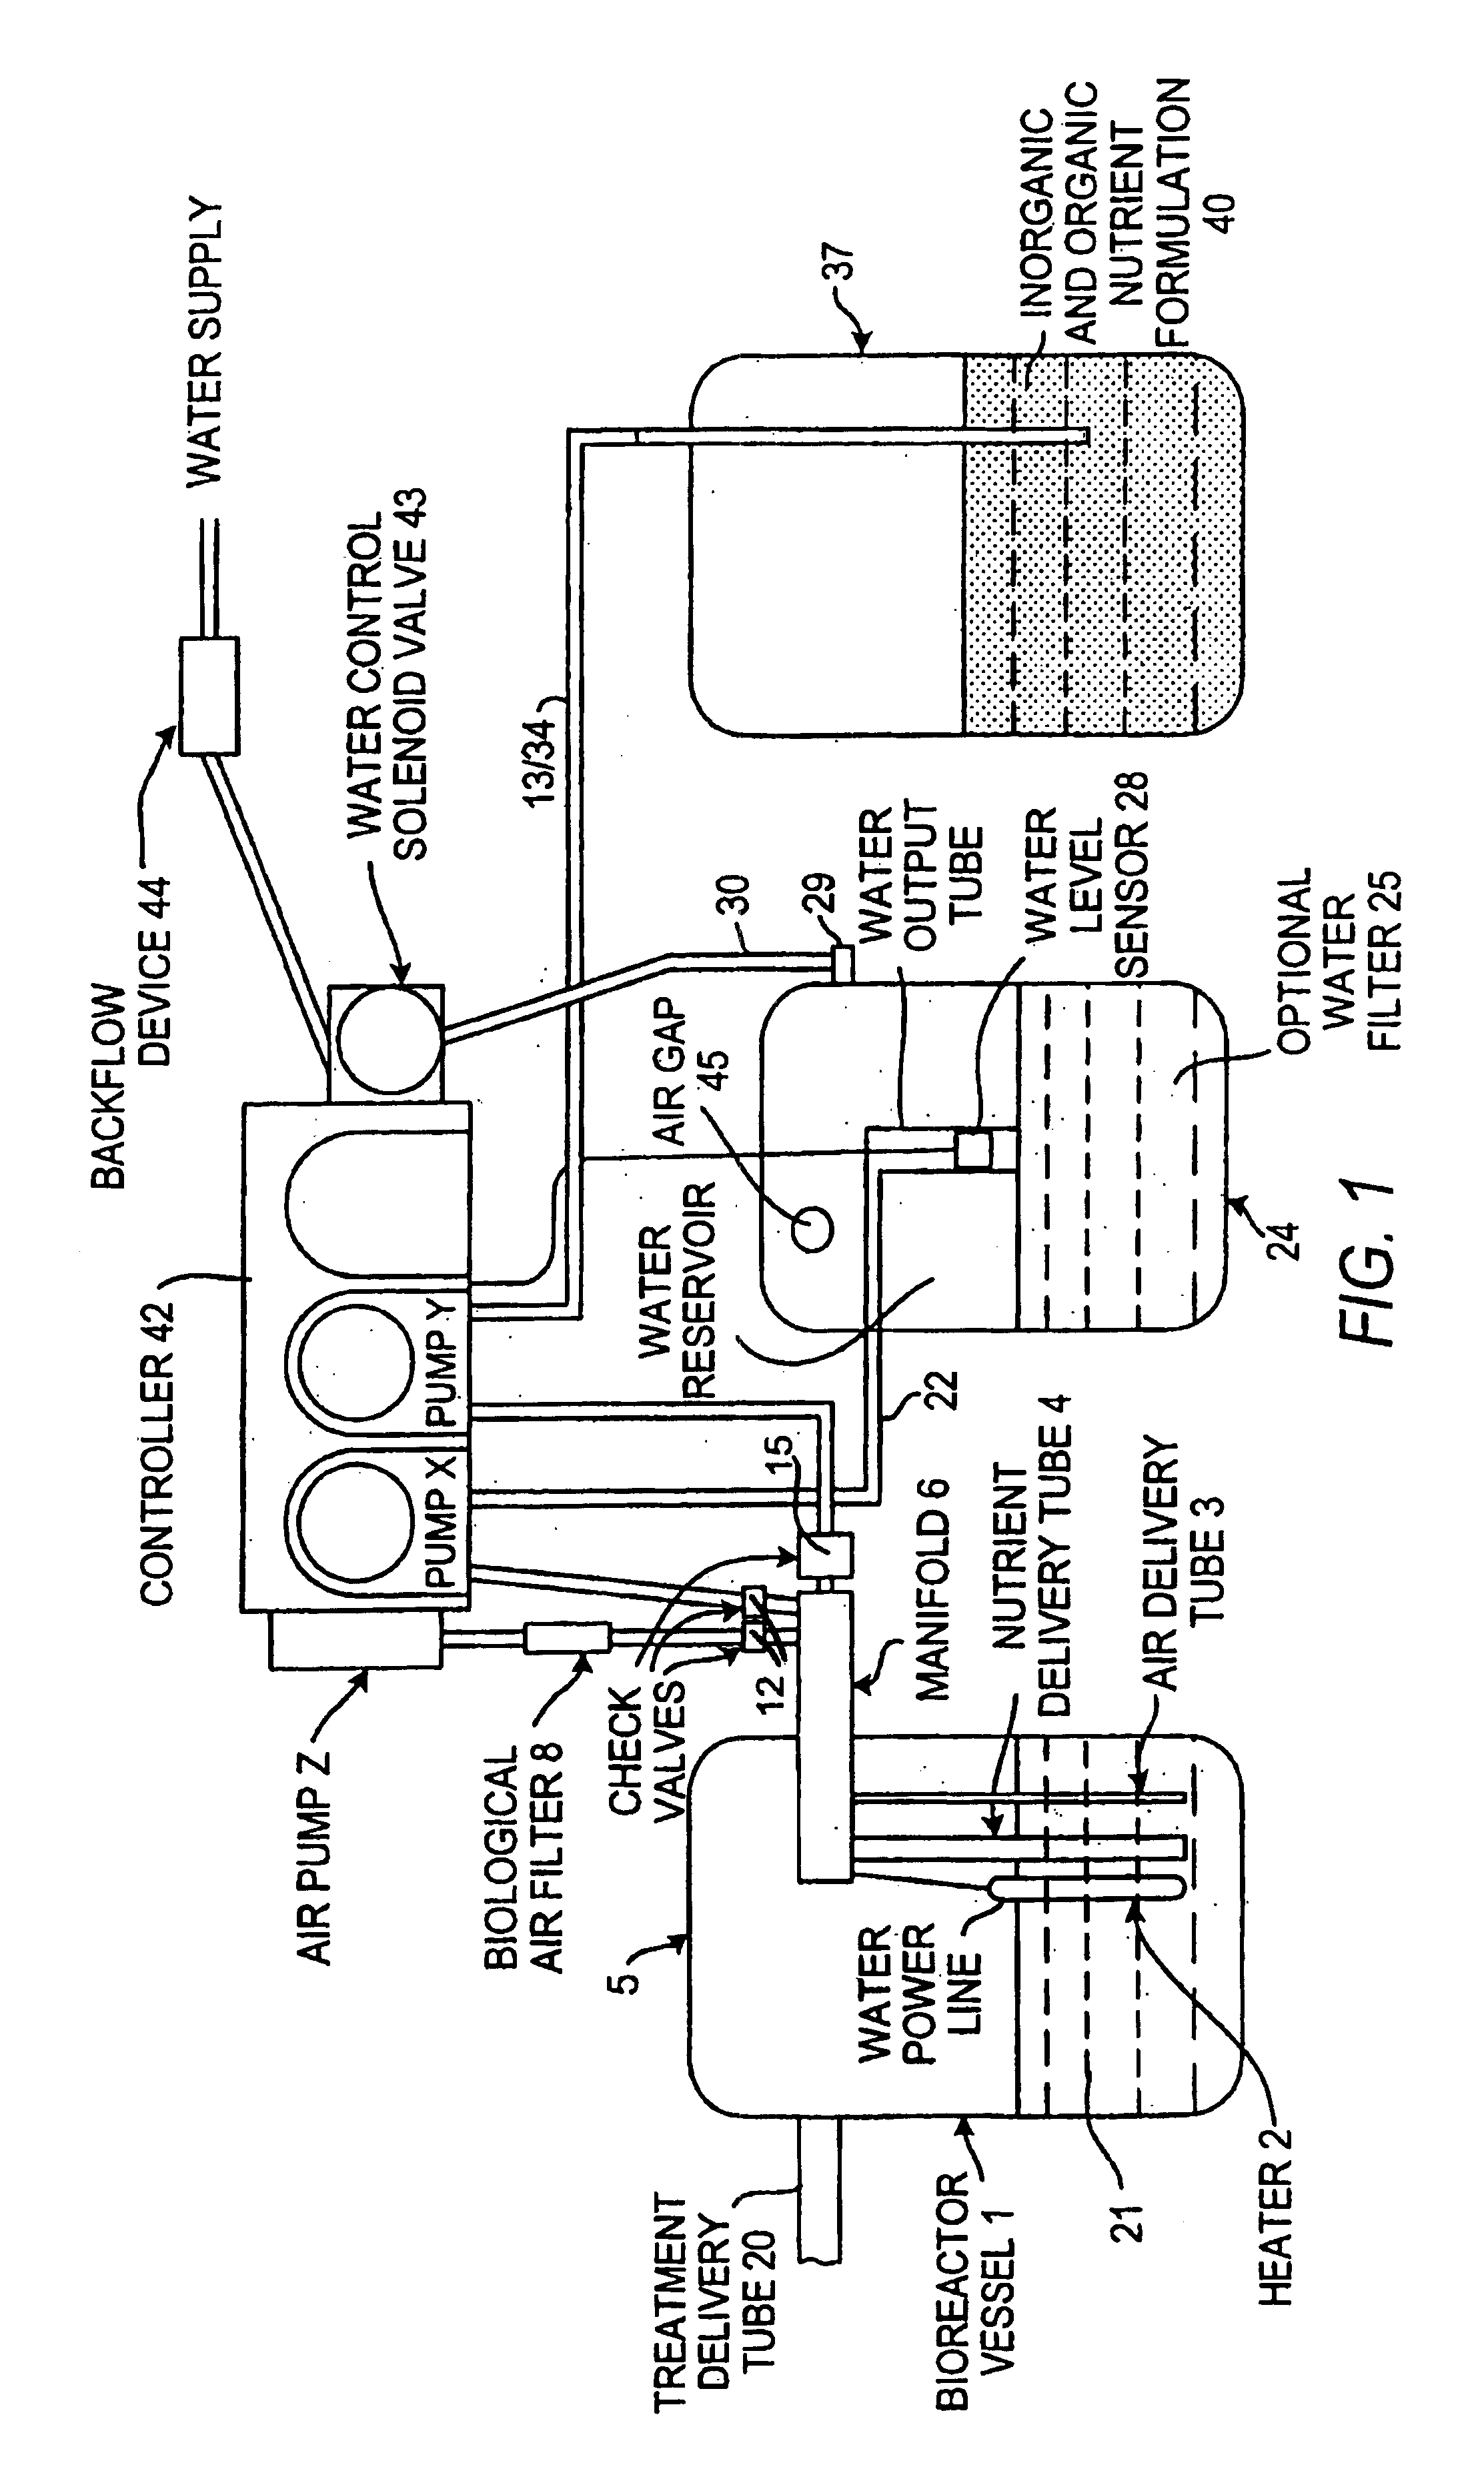 Apparatus and method for biological treatment of environmental contaminants and waste